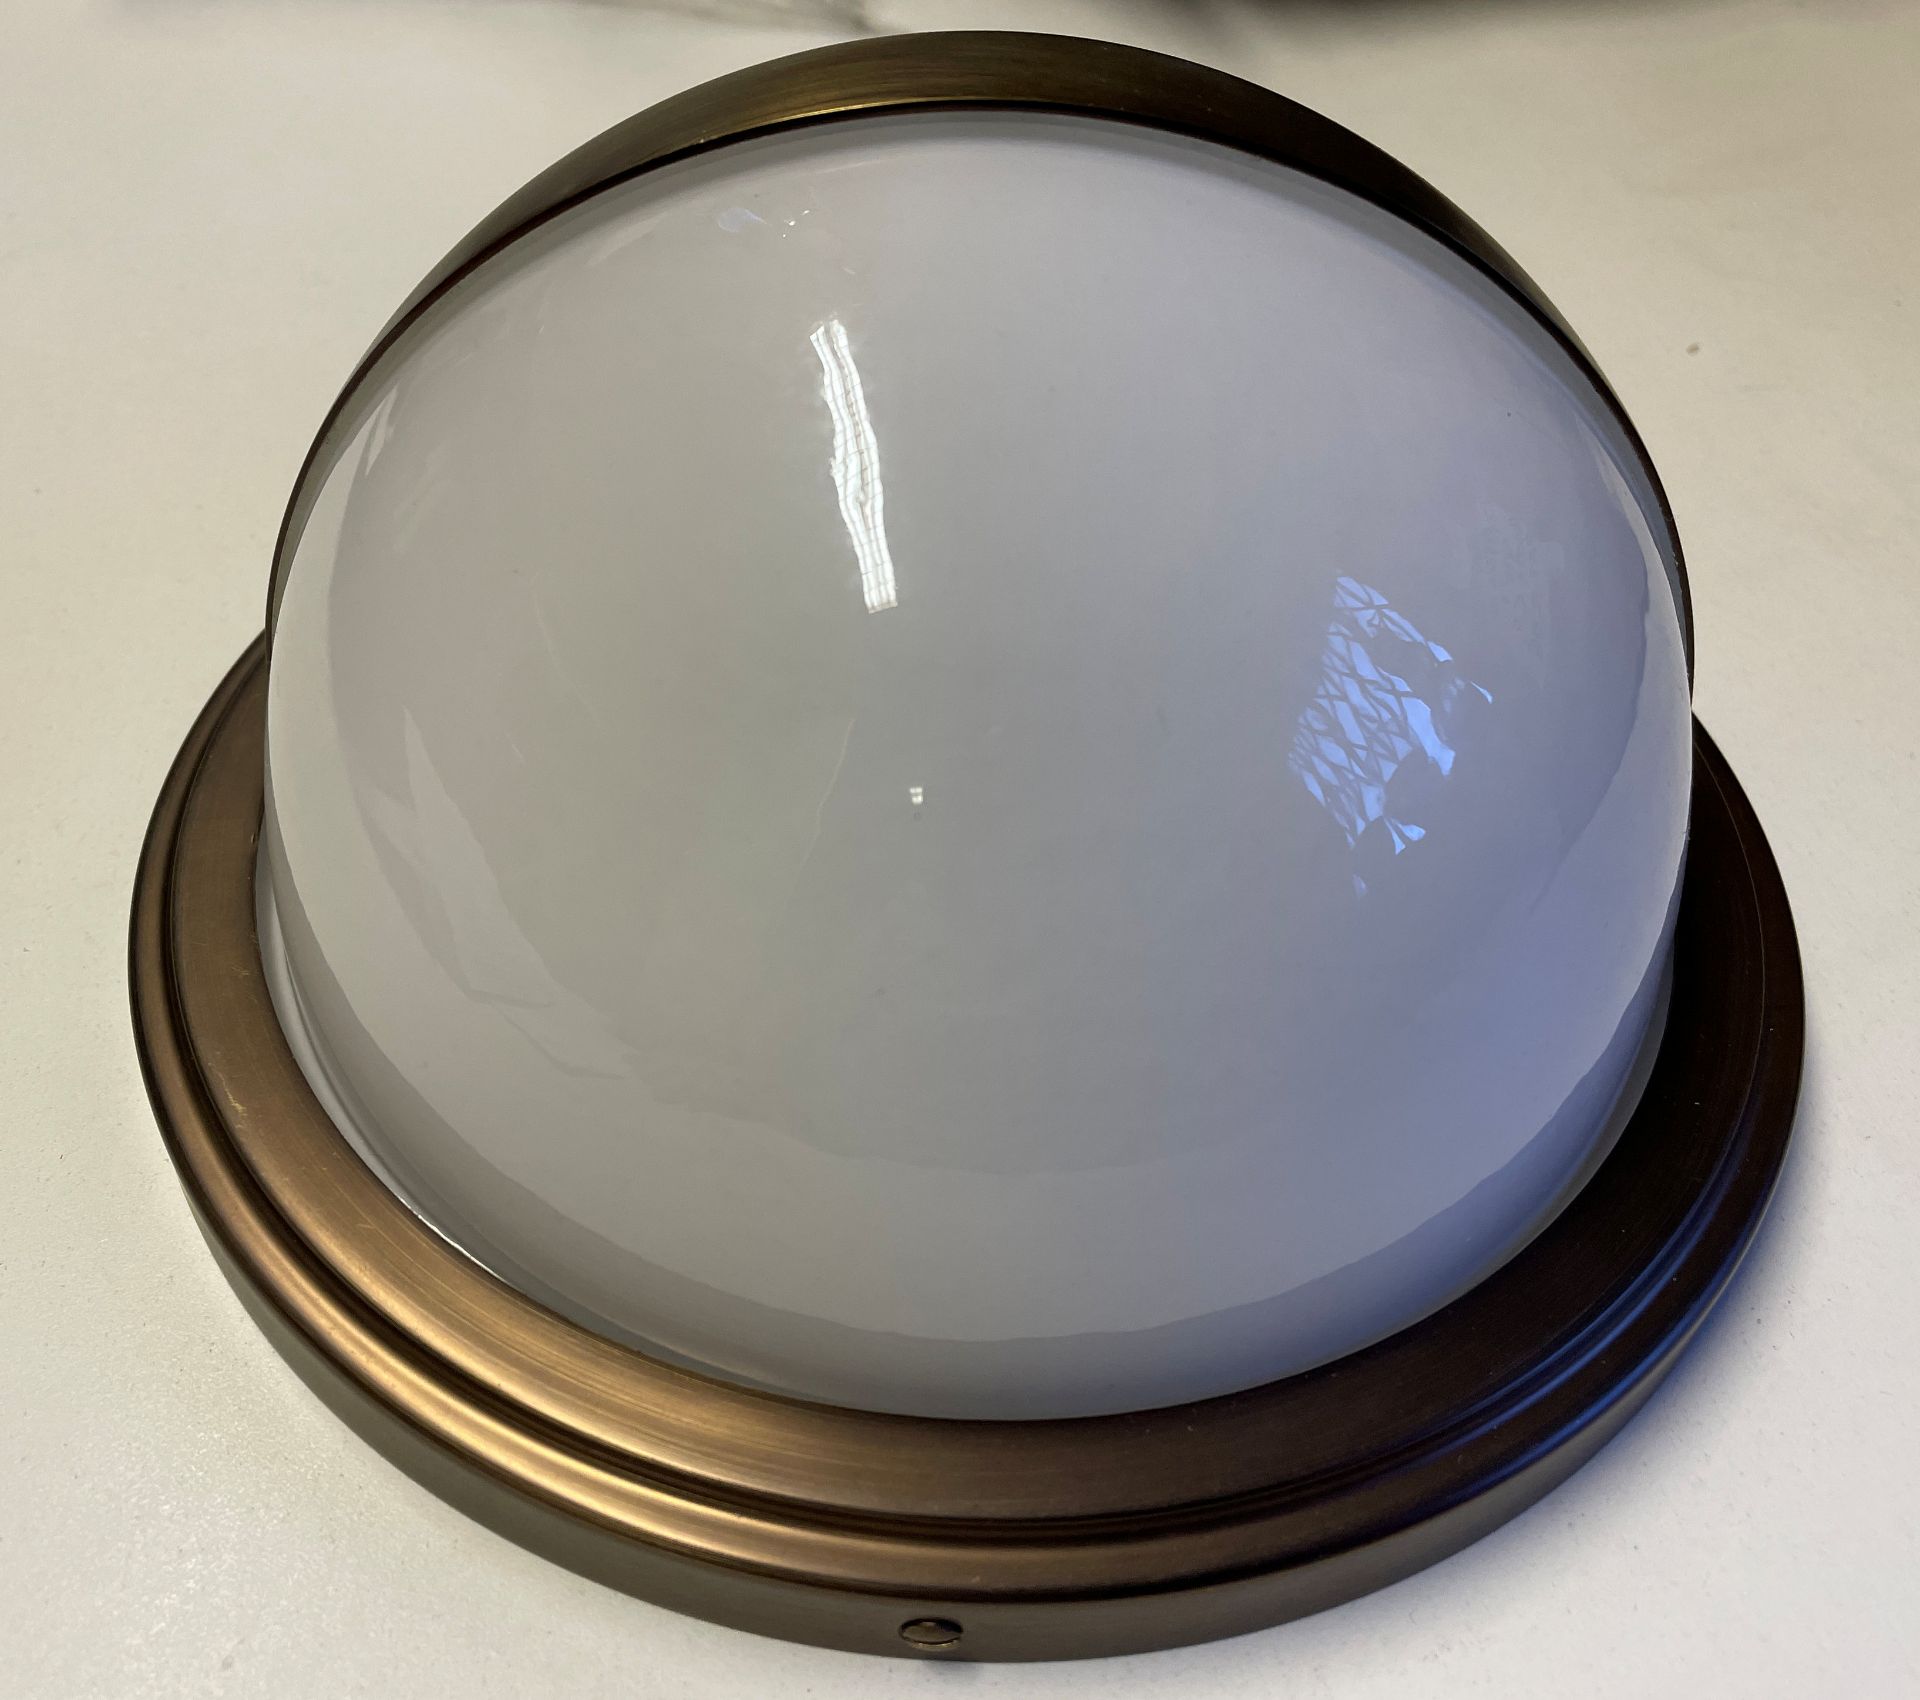 1 x Chelsom Brushed Brass Heavy Maritime style Wall lamp (20cm Diameter X 13cm depth) would look ju - Image 3 of 7